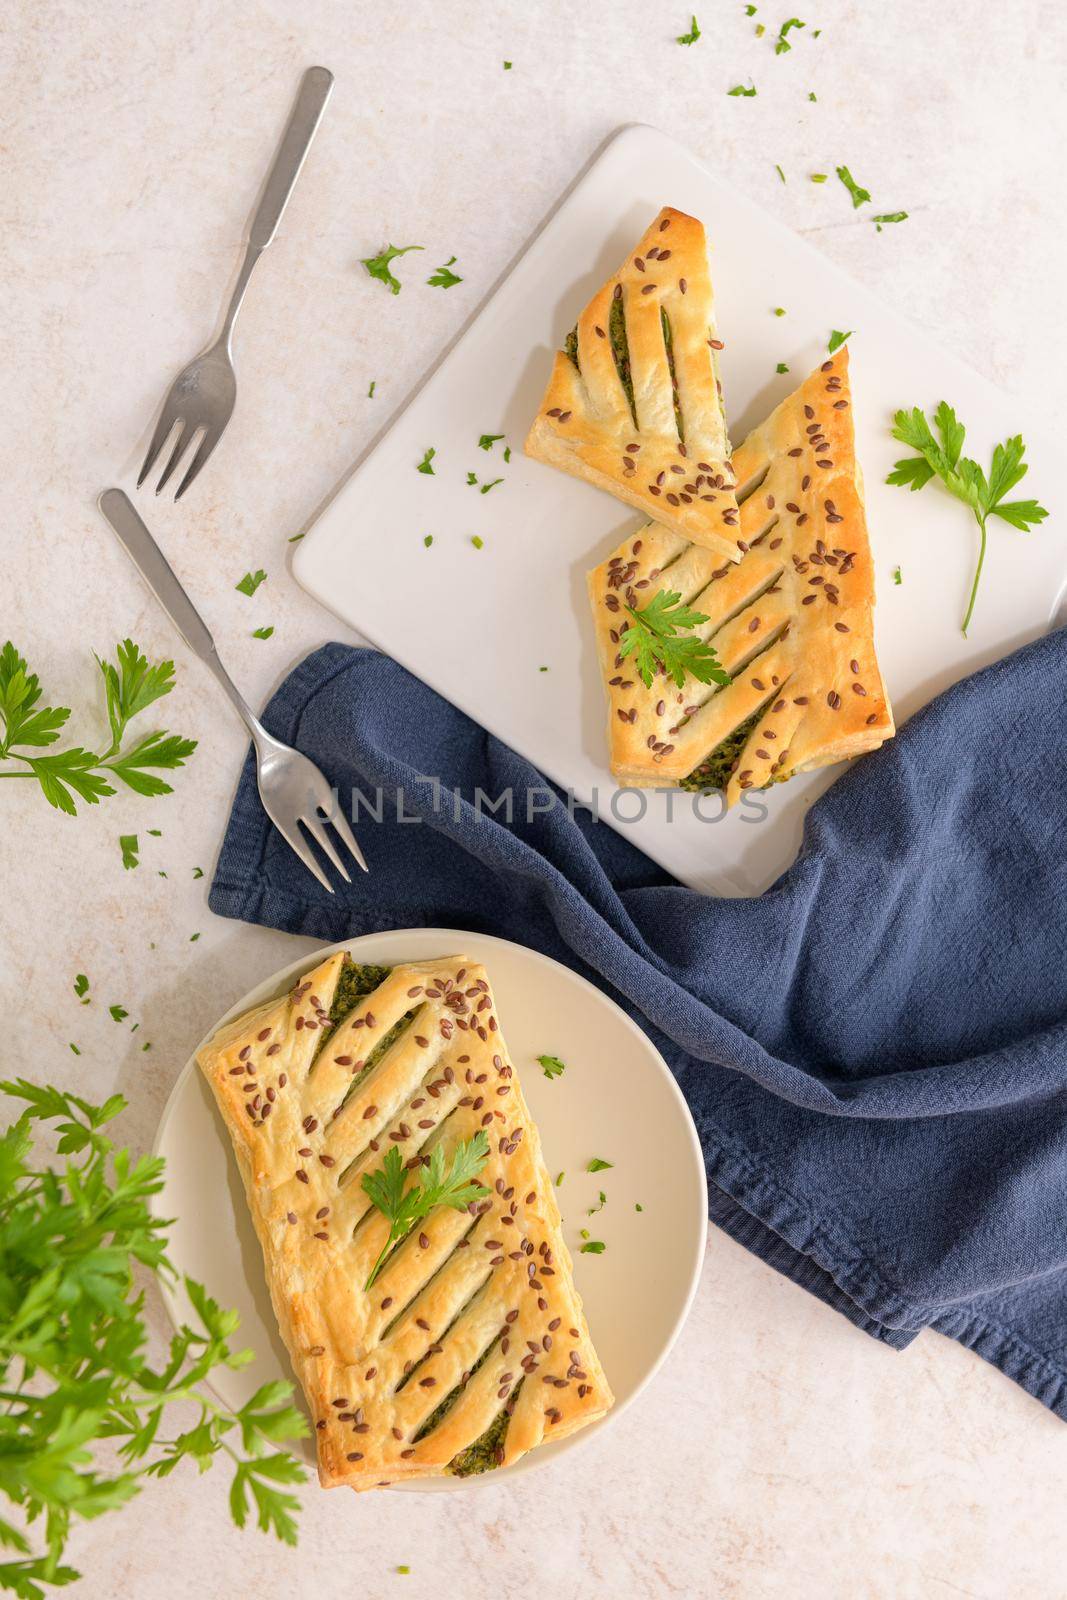 Spinach puff pastry with ricotta cheese and parsley leaves on white ceramic dishes in a kitchen counter top.